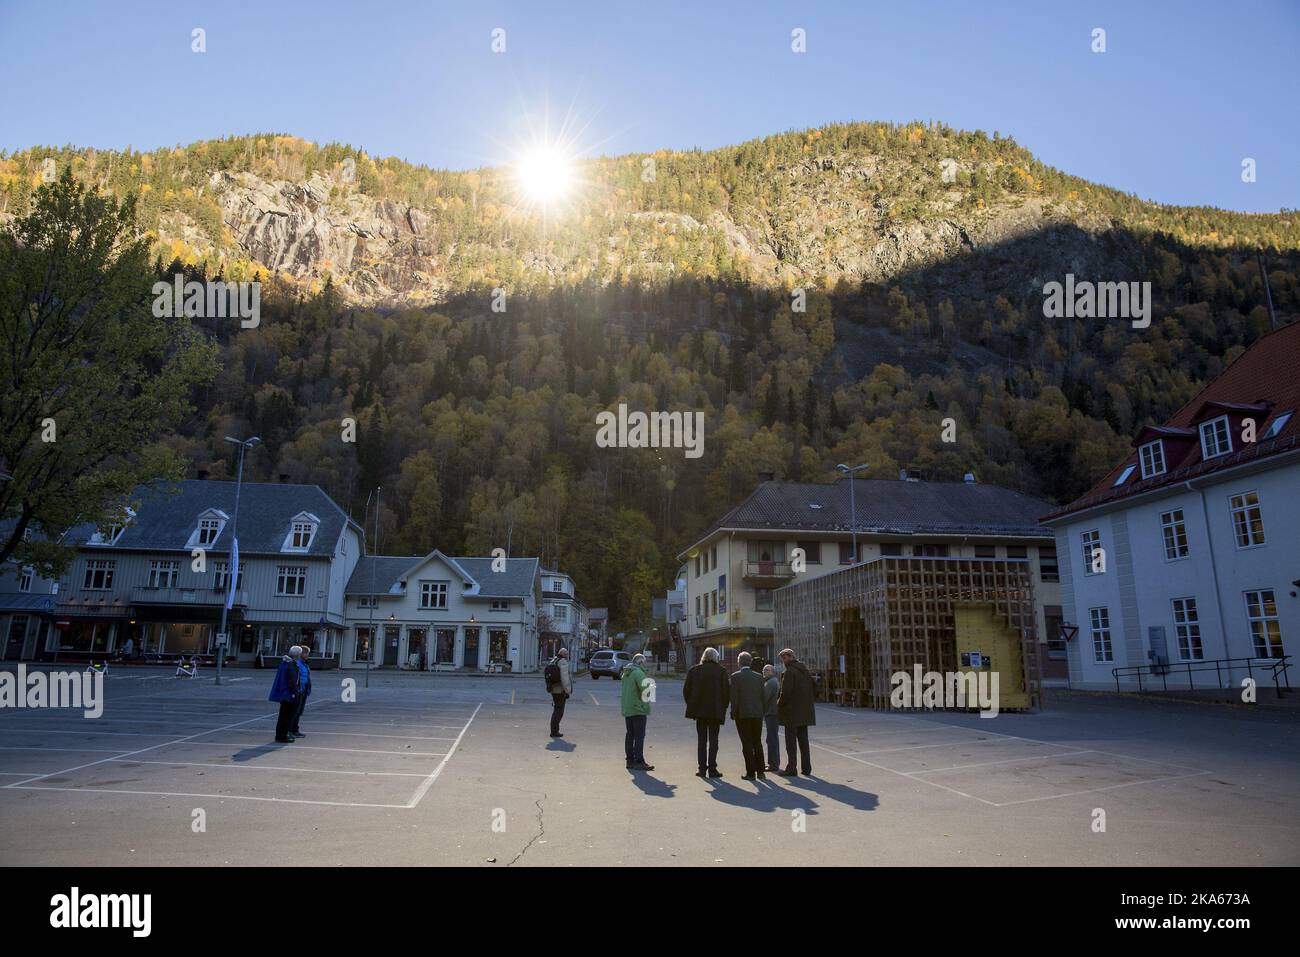 People gather at a spot illuminated by reflected sunlight in front of the town hall of Rjukan, Norway, 18 October 2013. Rjukan, known for its darkness in winter, is located in the bottom of a valley between steep mountains in Telemark County, some 150 km west of Oslo. The idea about mirrors reflecting sunshine to the town in winter was brought up already 100 years ago and only now became reallity. The mirrors will officially start operation on 31 October.  Stock Photo